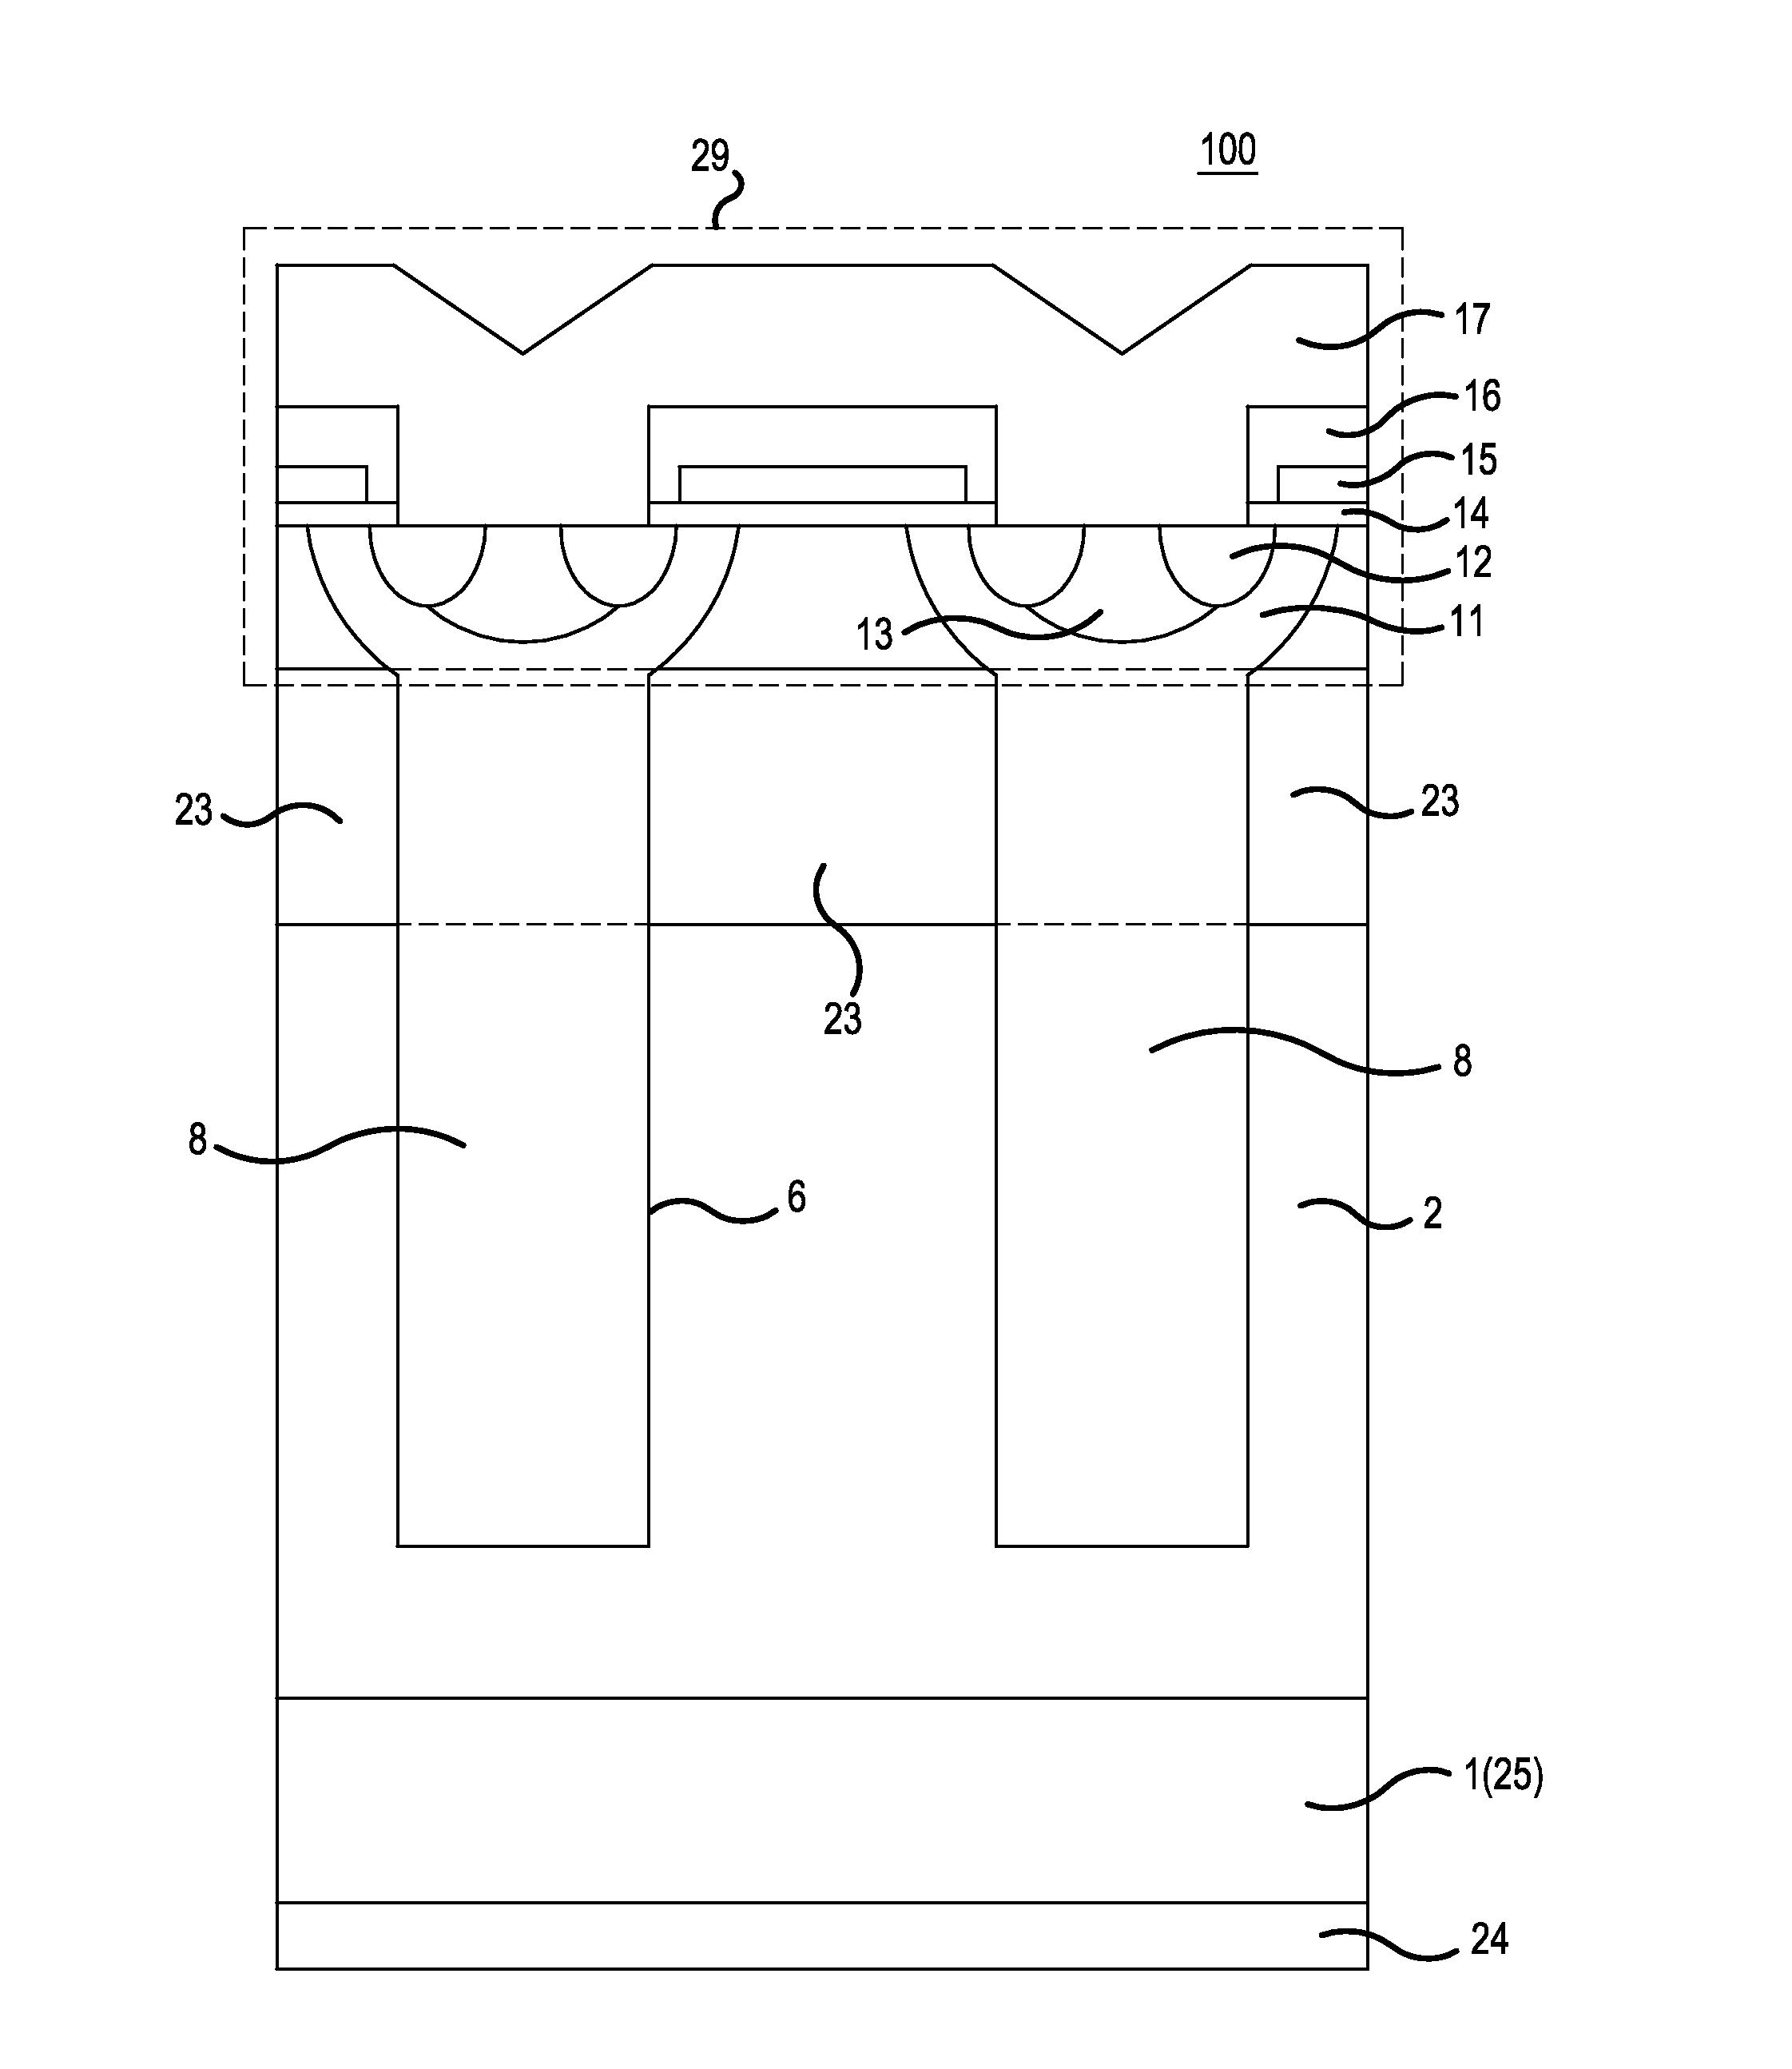 Method of manufacturing a super-junciton semiconductor device